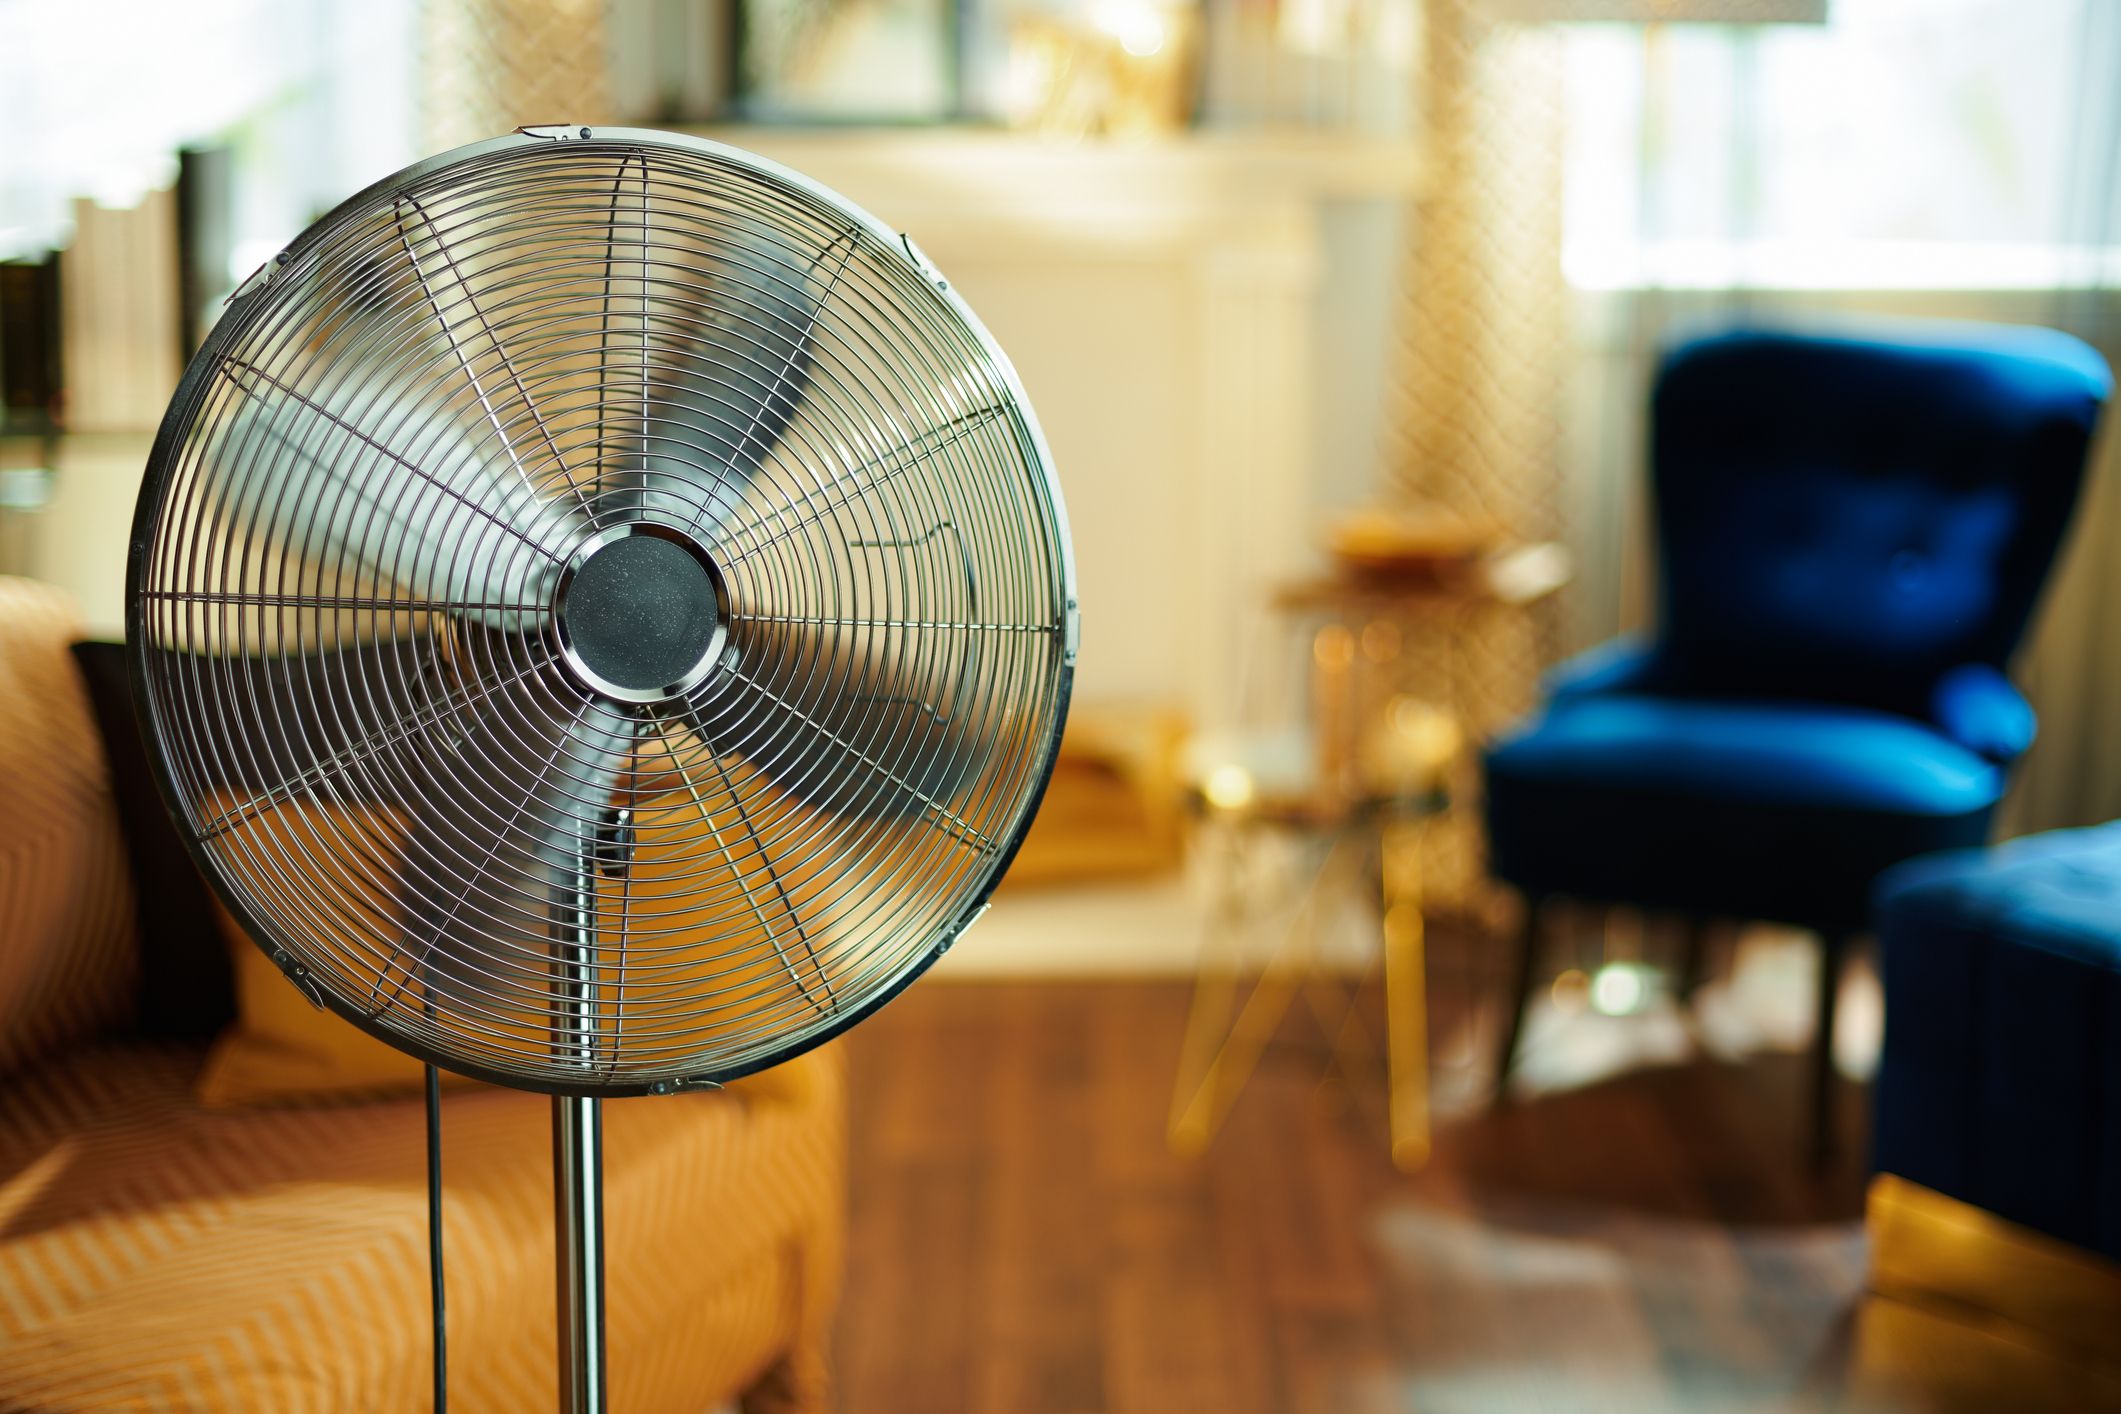 A large metal floor fan is in focus in a stylish room with blurred modern furniture, including a blue velvet chair and golden accents.